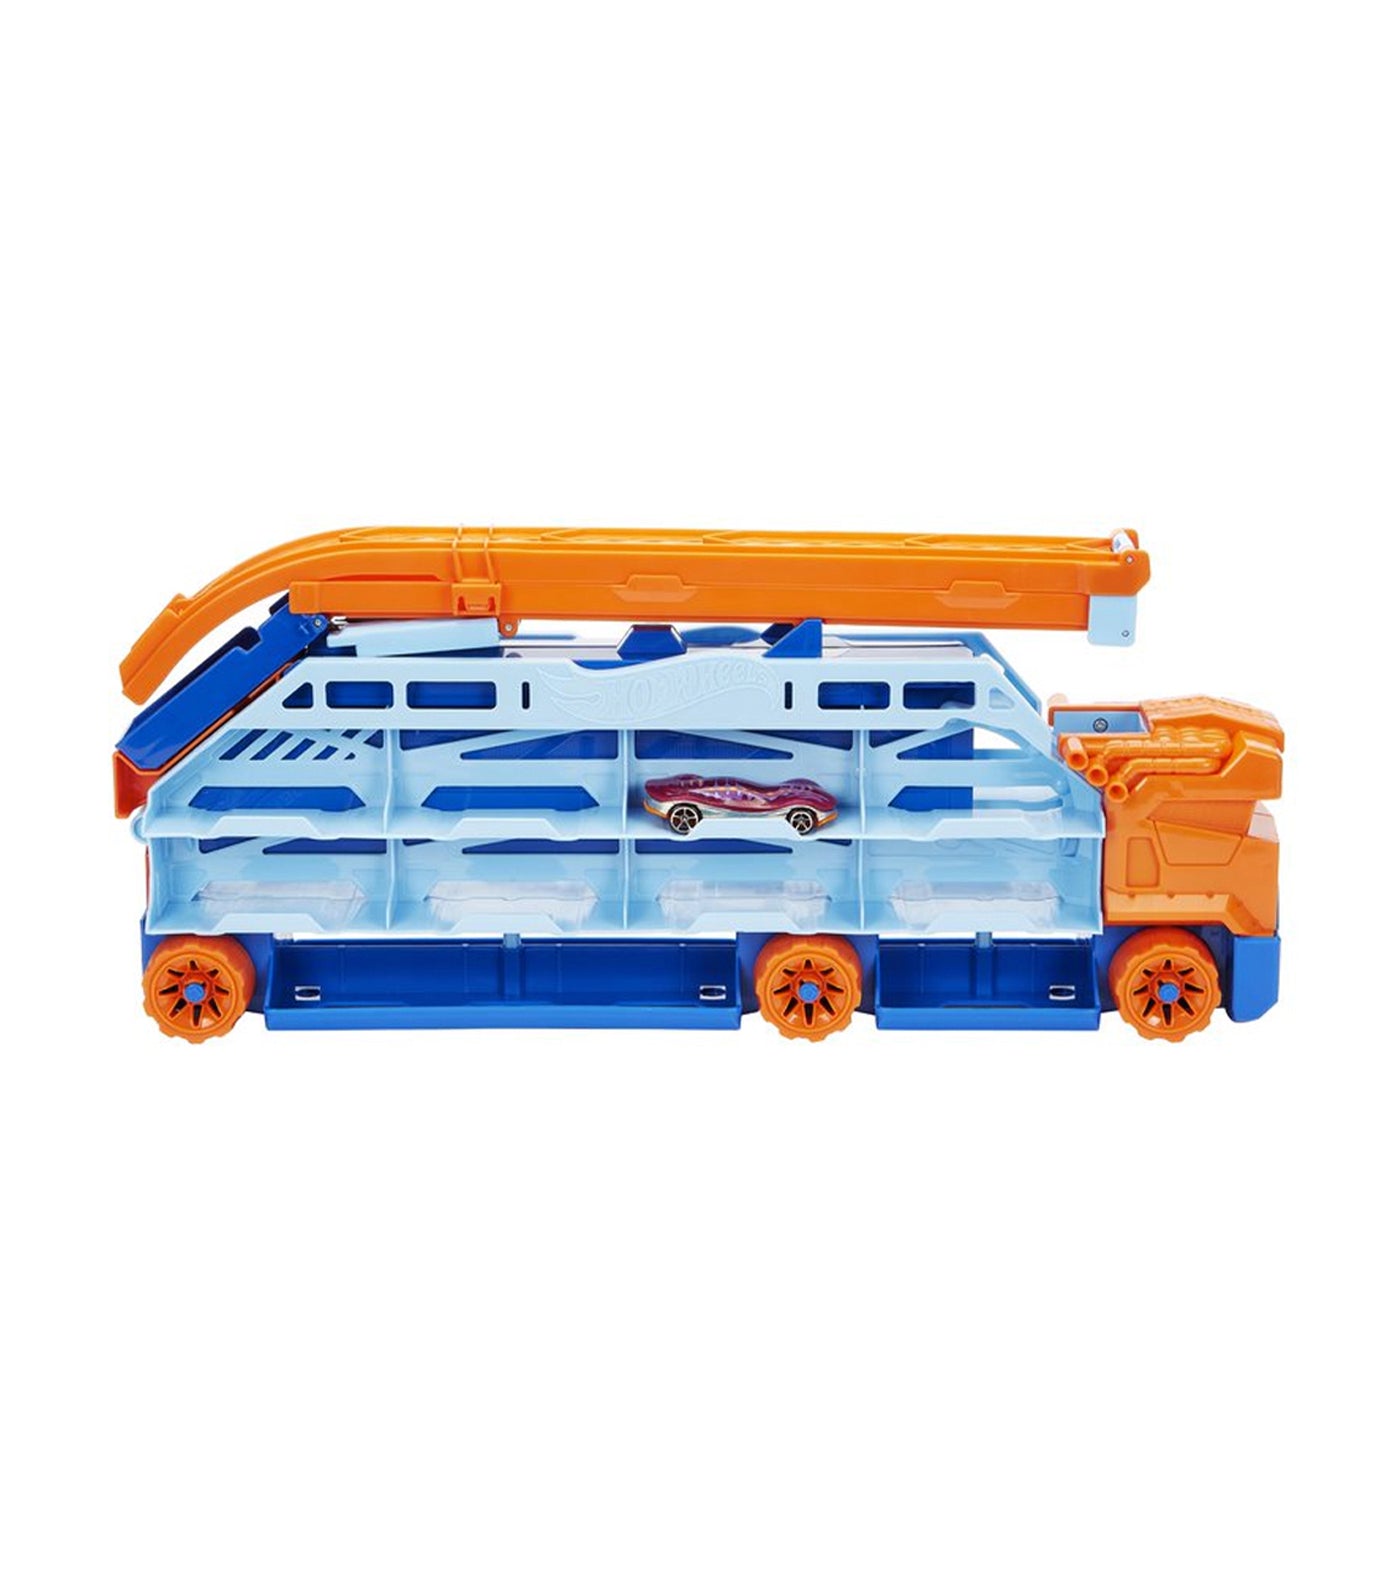 Hot Wheels City Speed Drop Transport Hauler with 1 Toy Car, Stores 20+ 1:64  Scale Vehicles 